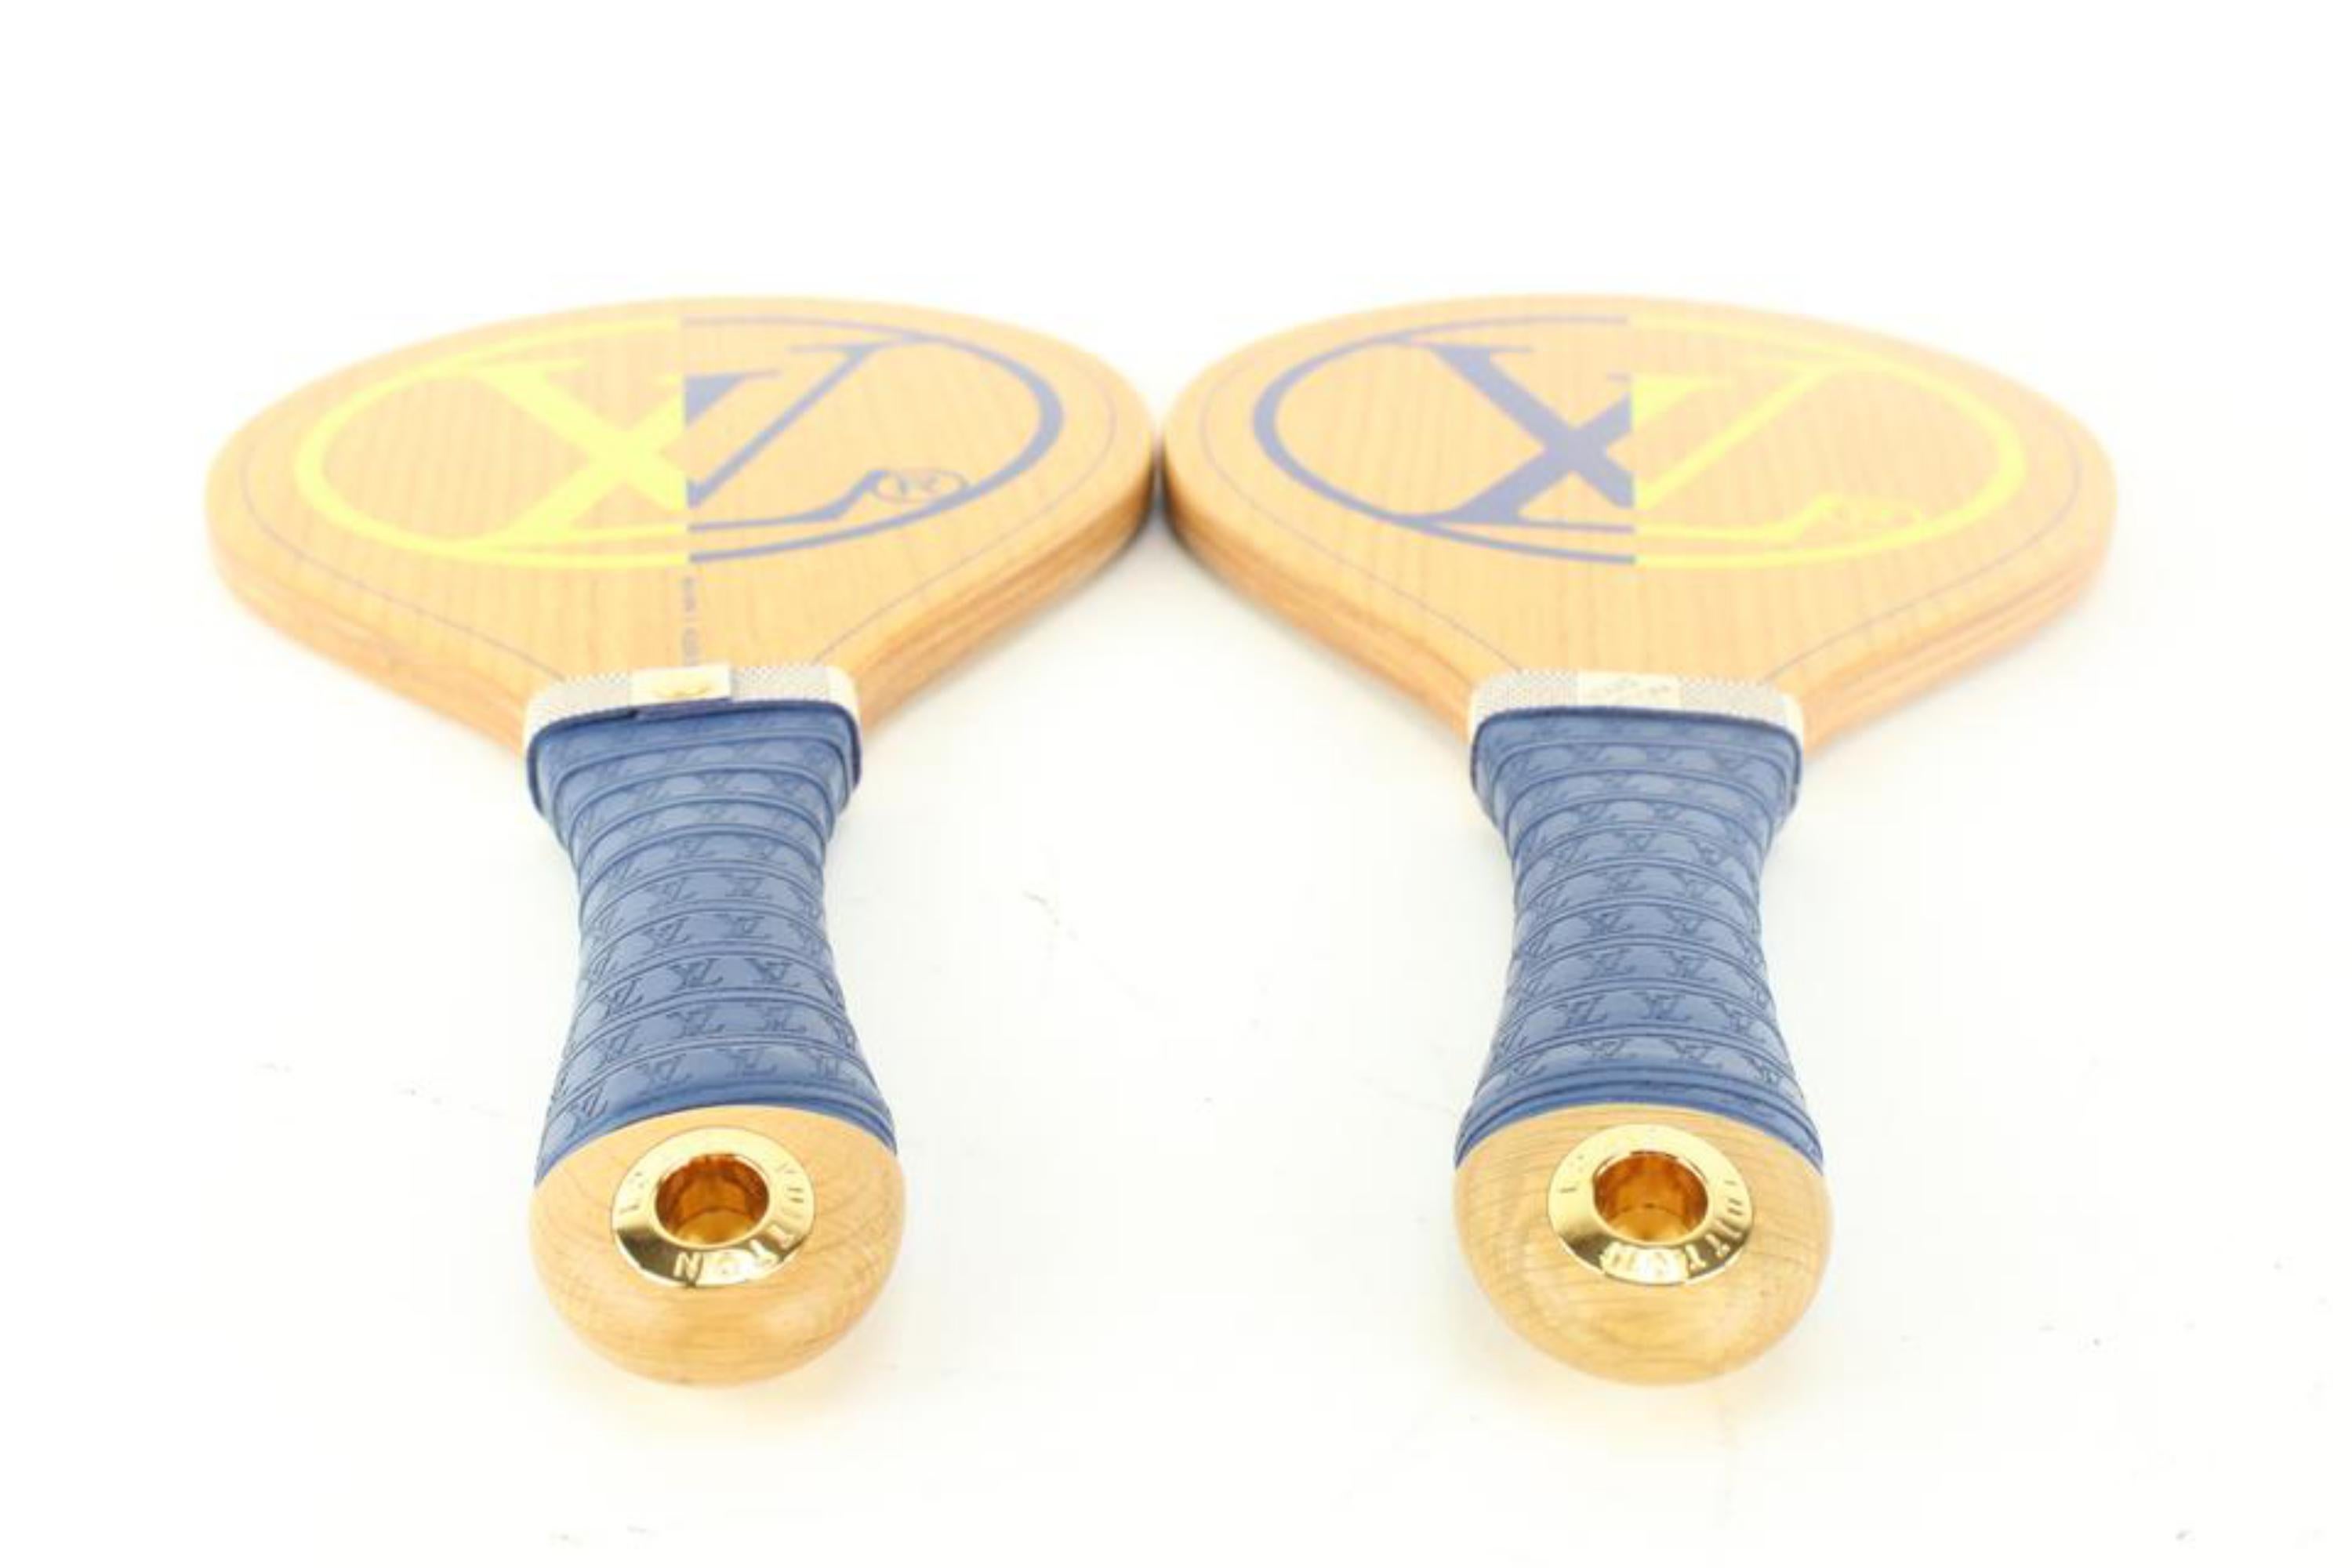 Louis Vuitton Beach Bat Paddle Set 54lz62s In New Condition For Sale In Dix hills, NY